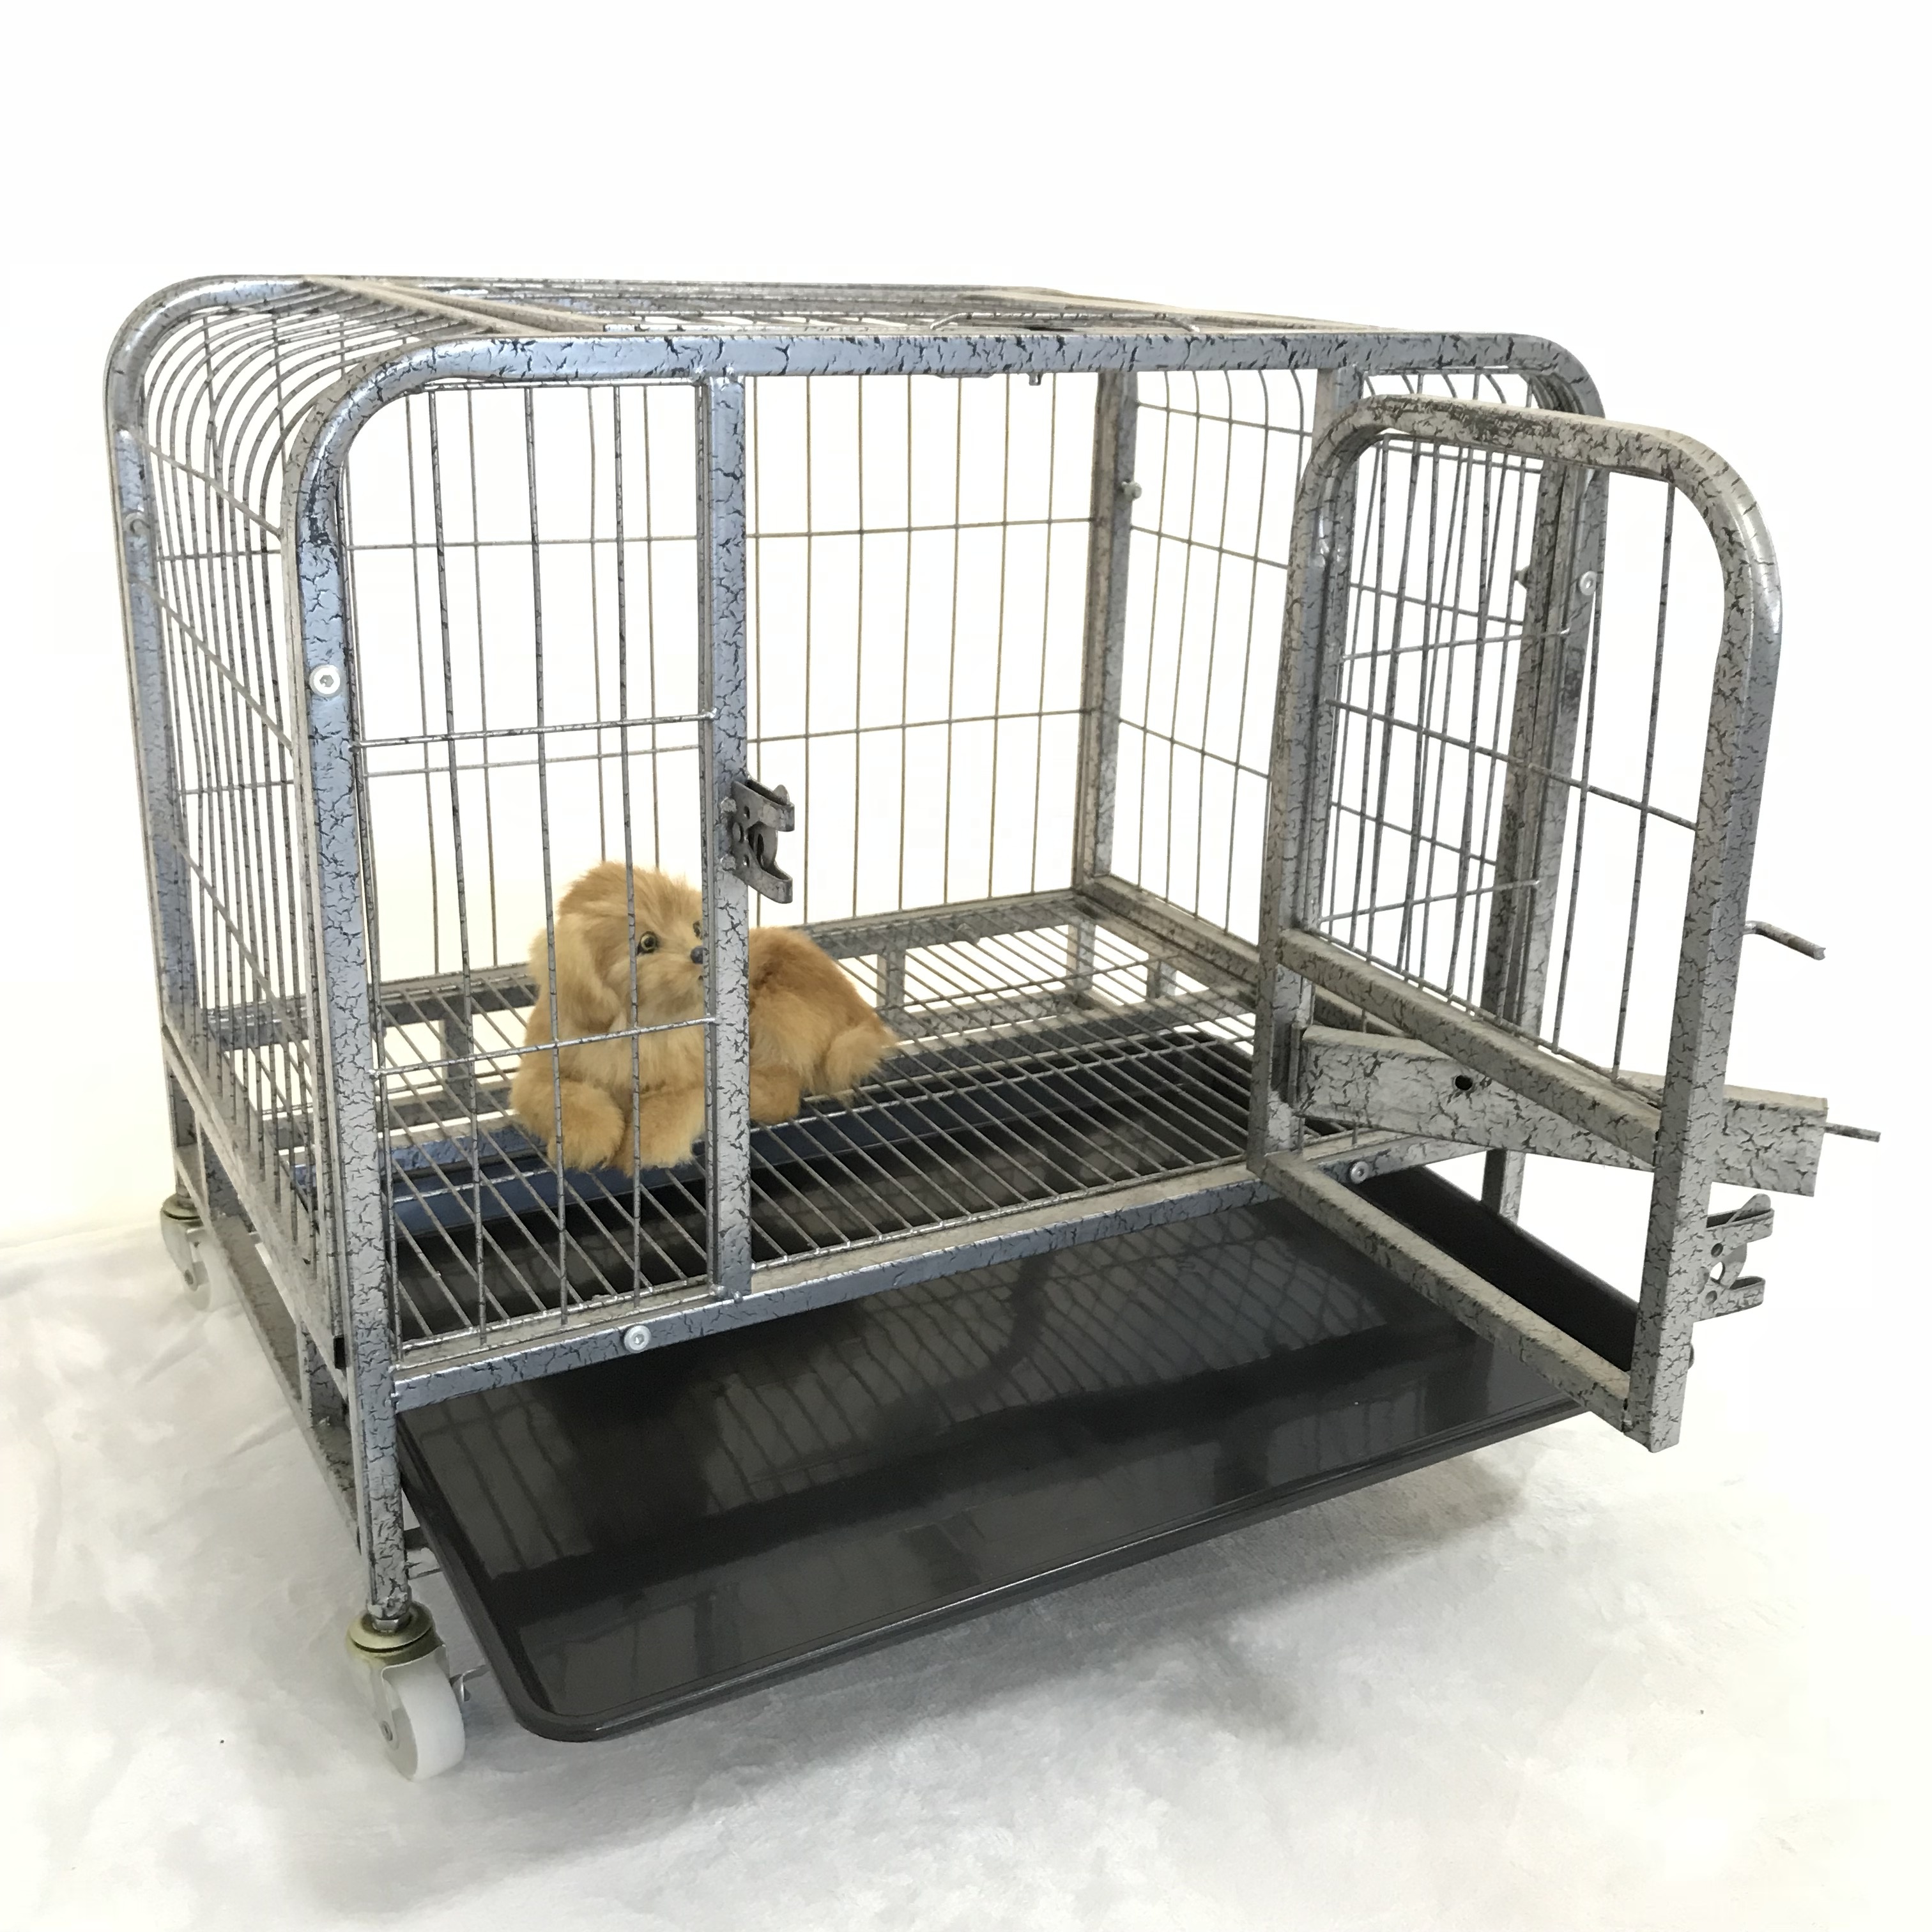 Galvanized Double-Door Folding Metal Luxury large steel Strong Heavy Duty Dog Friendly Playpen cage crate